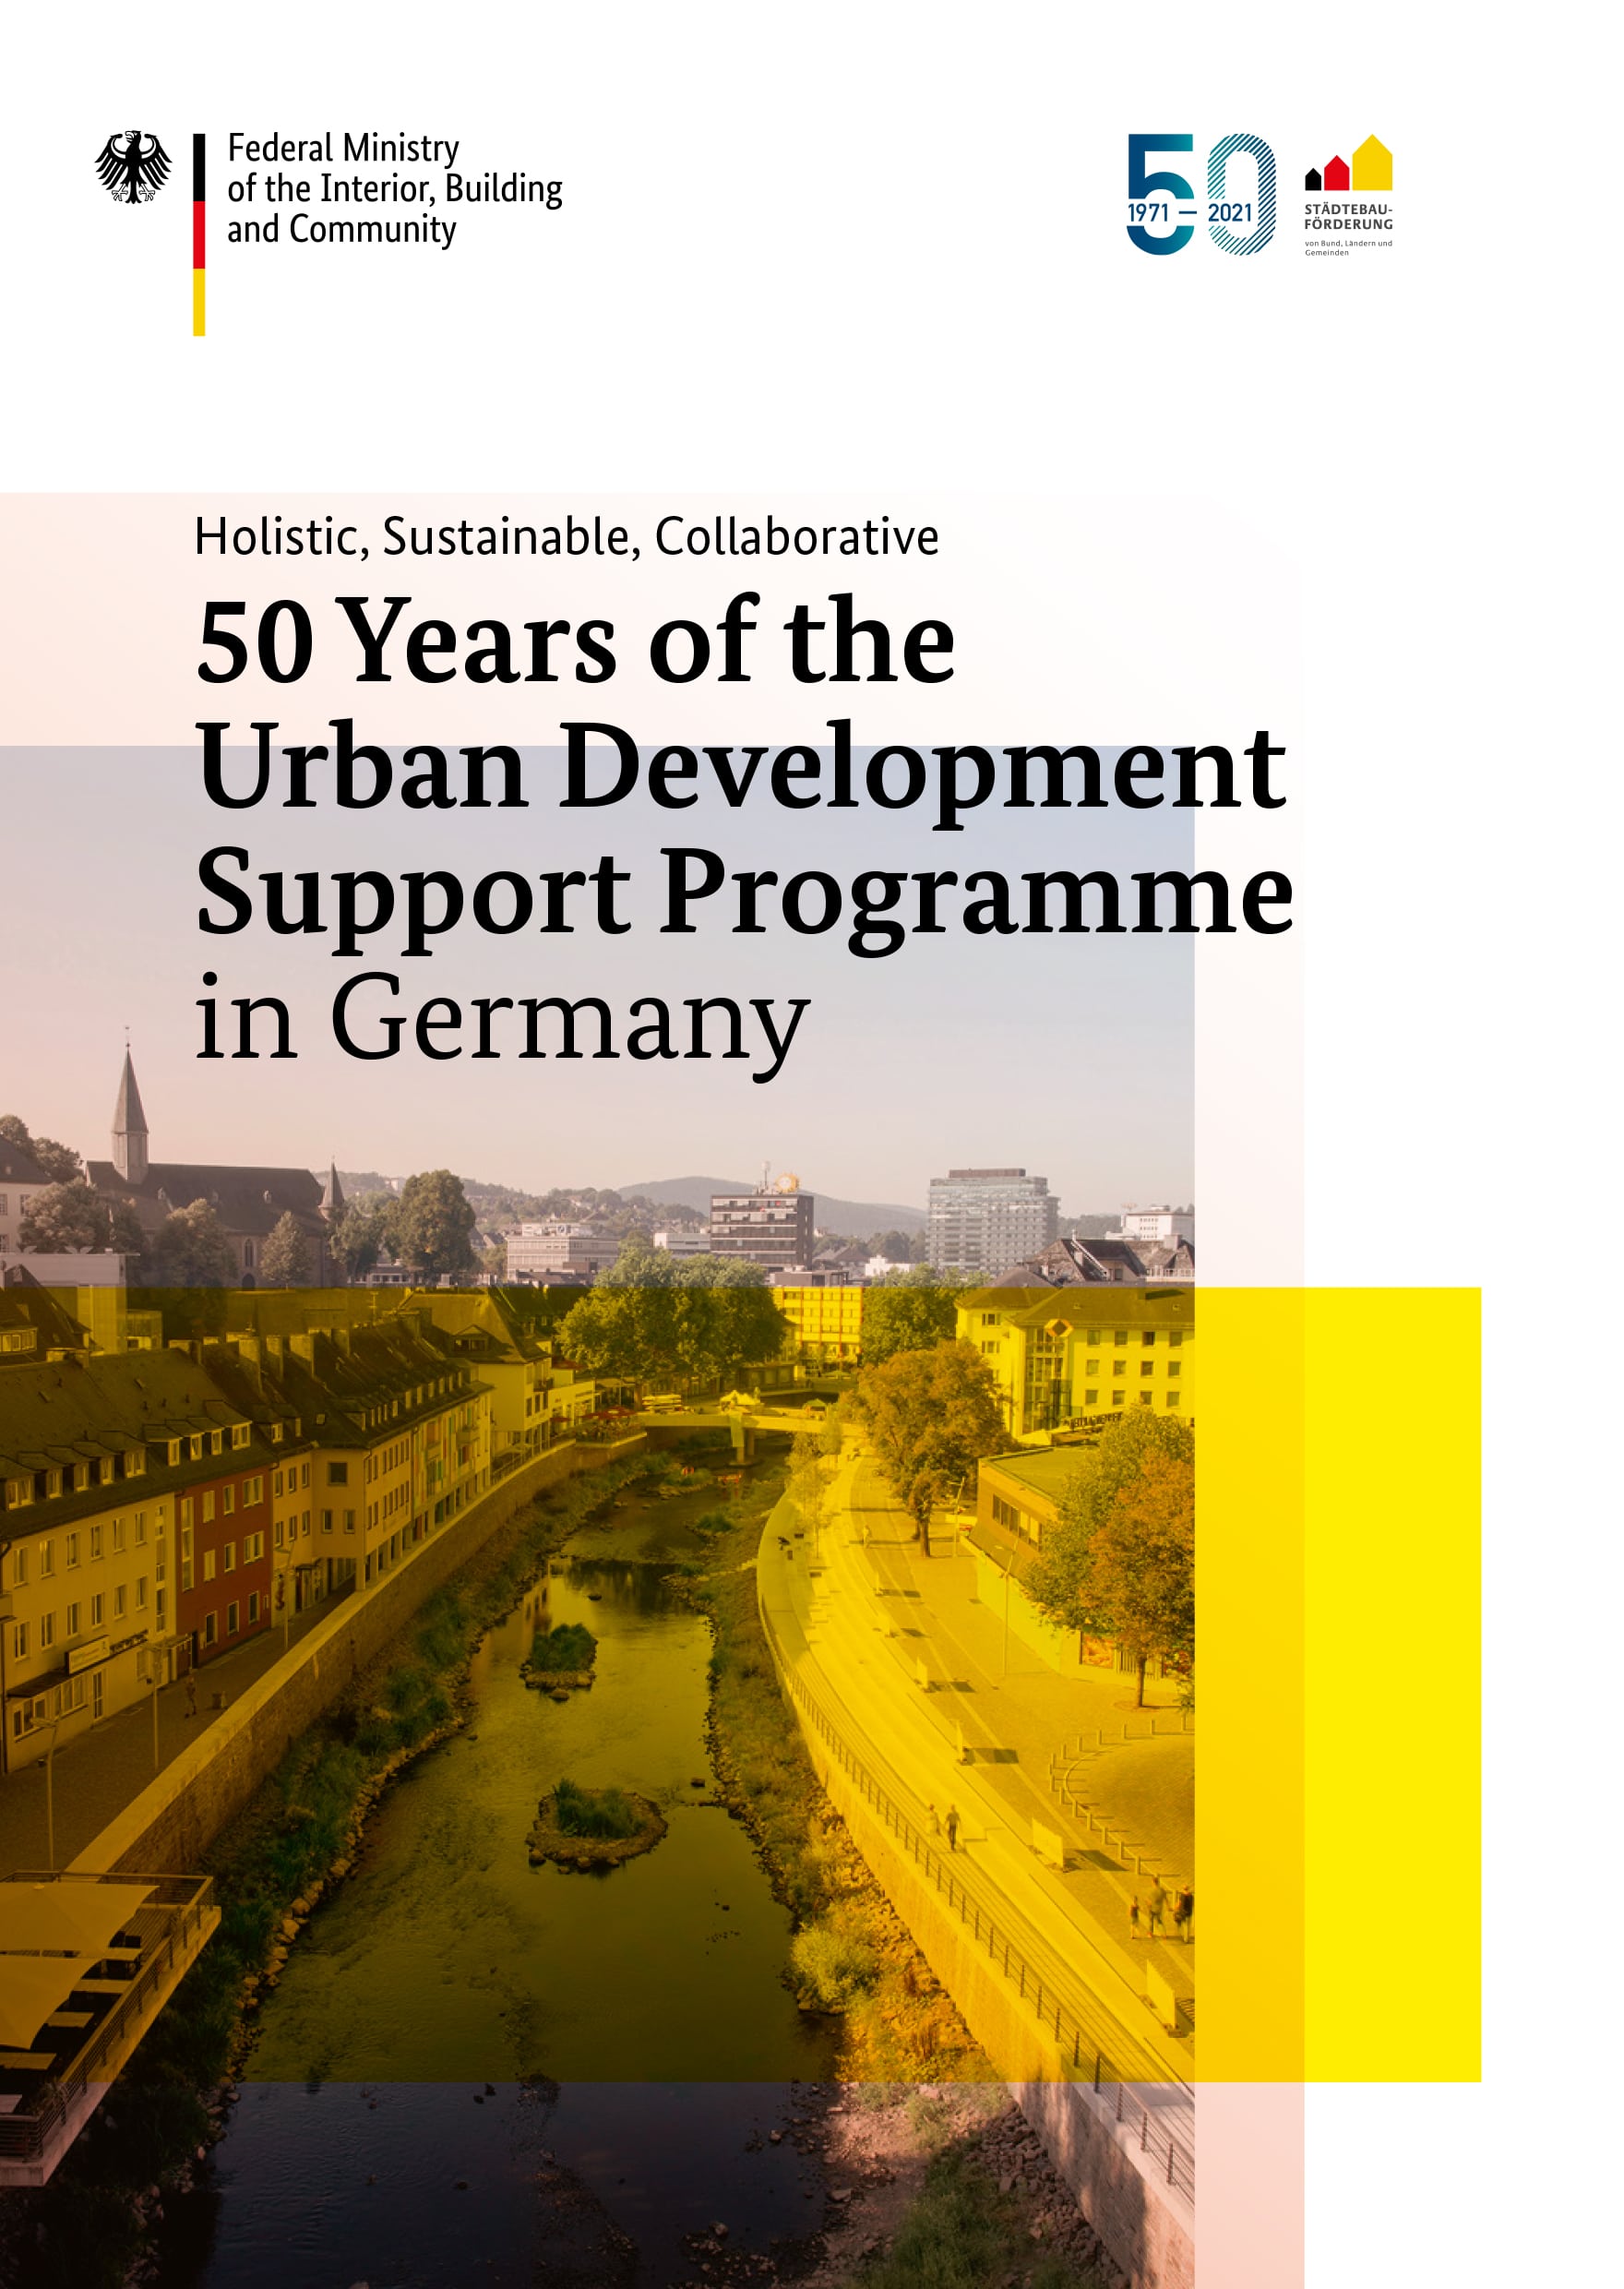 Holistic, Sustainable, Collaborative – 50 Years of the Urban Development Support Programme in Germany